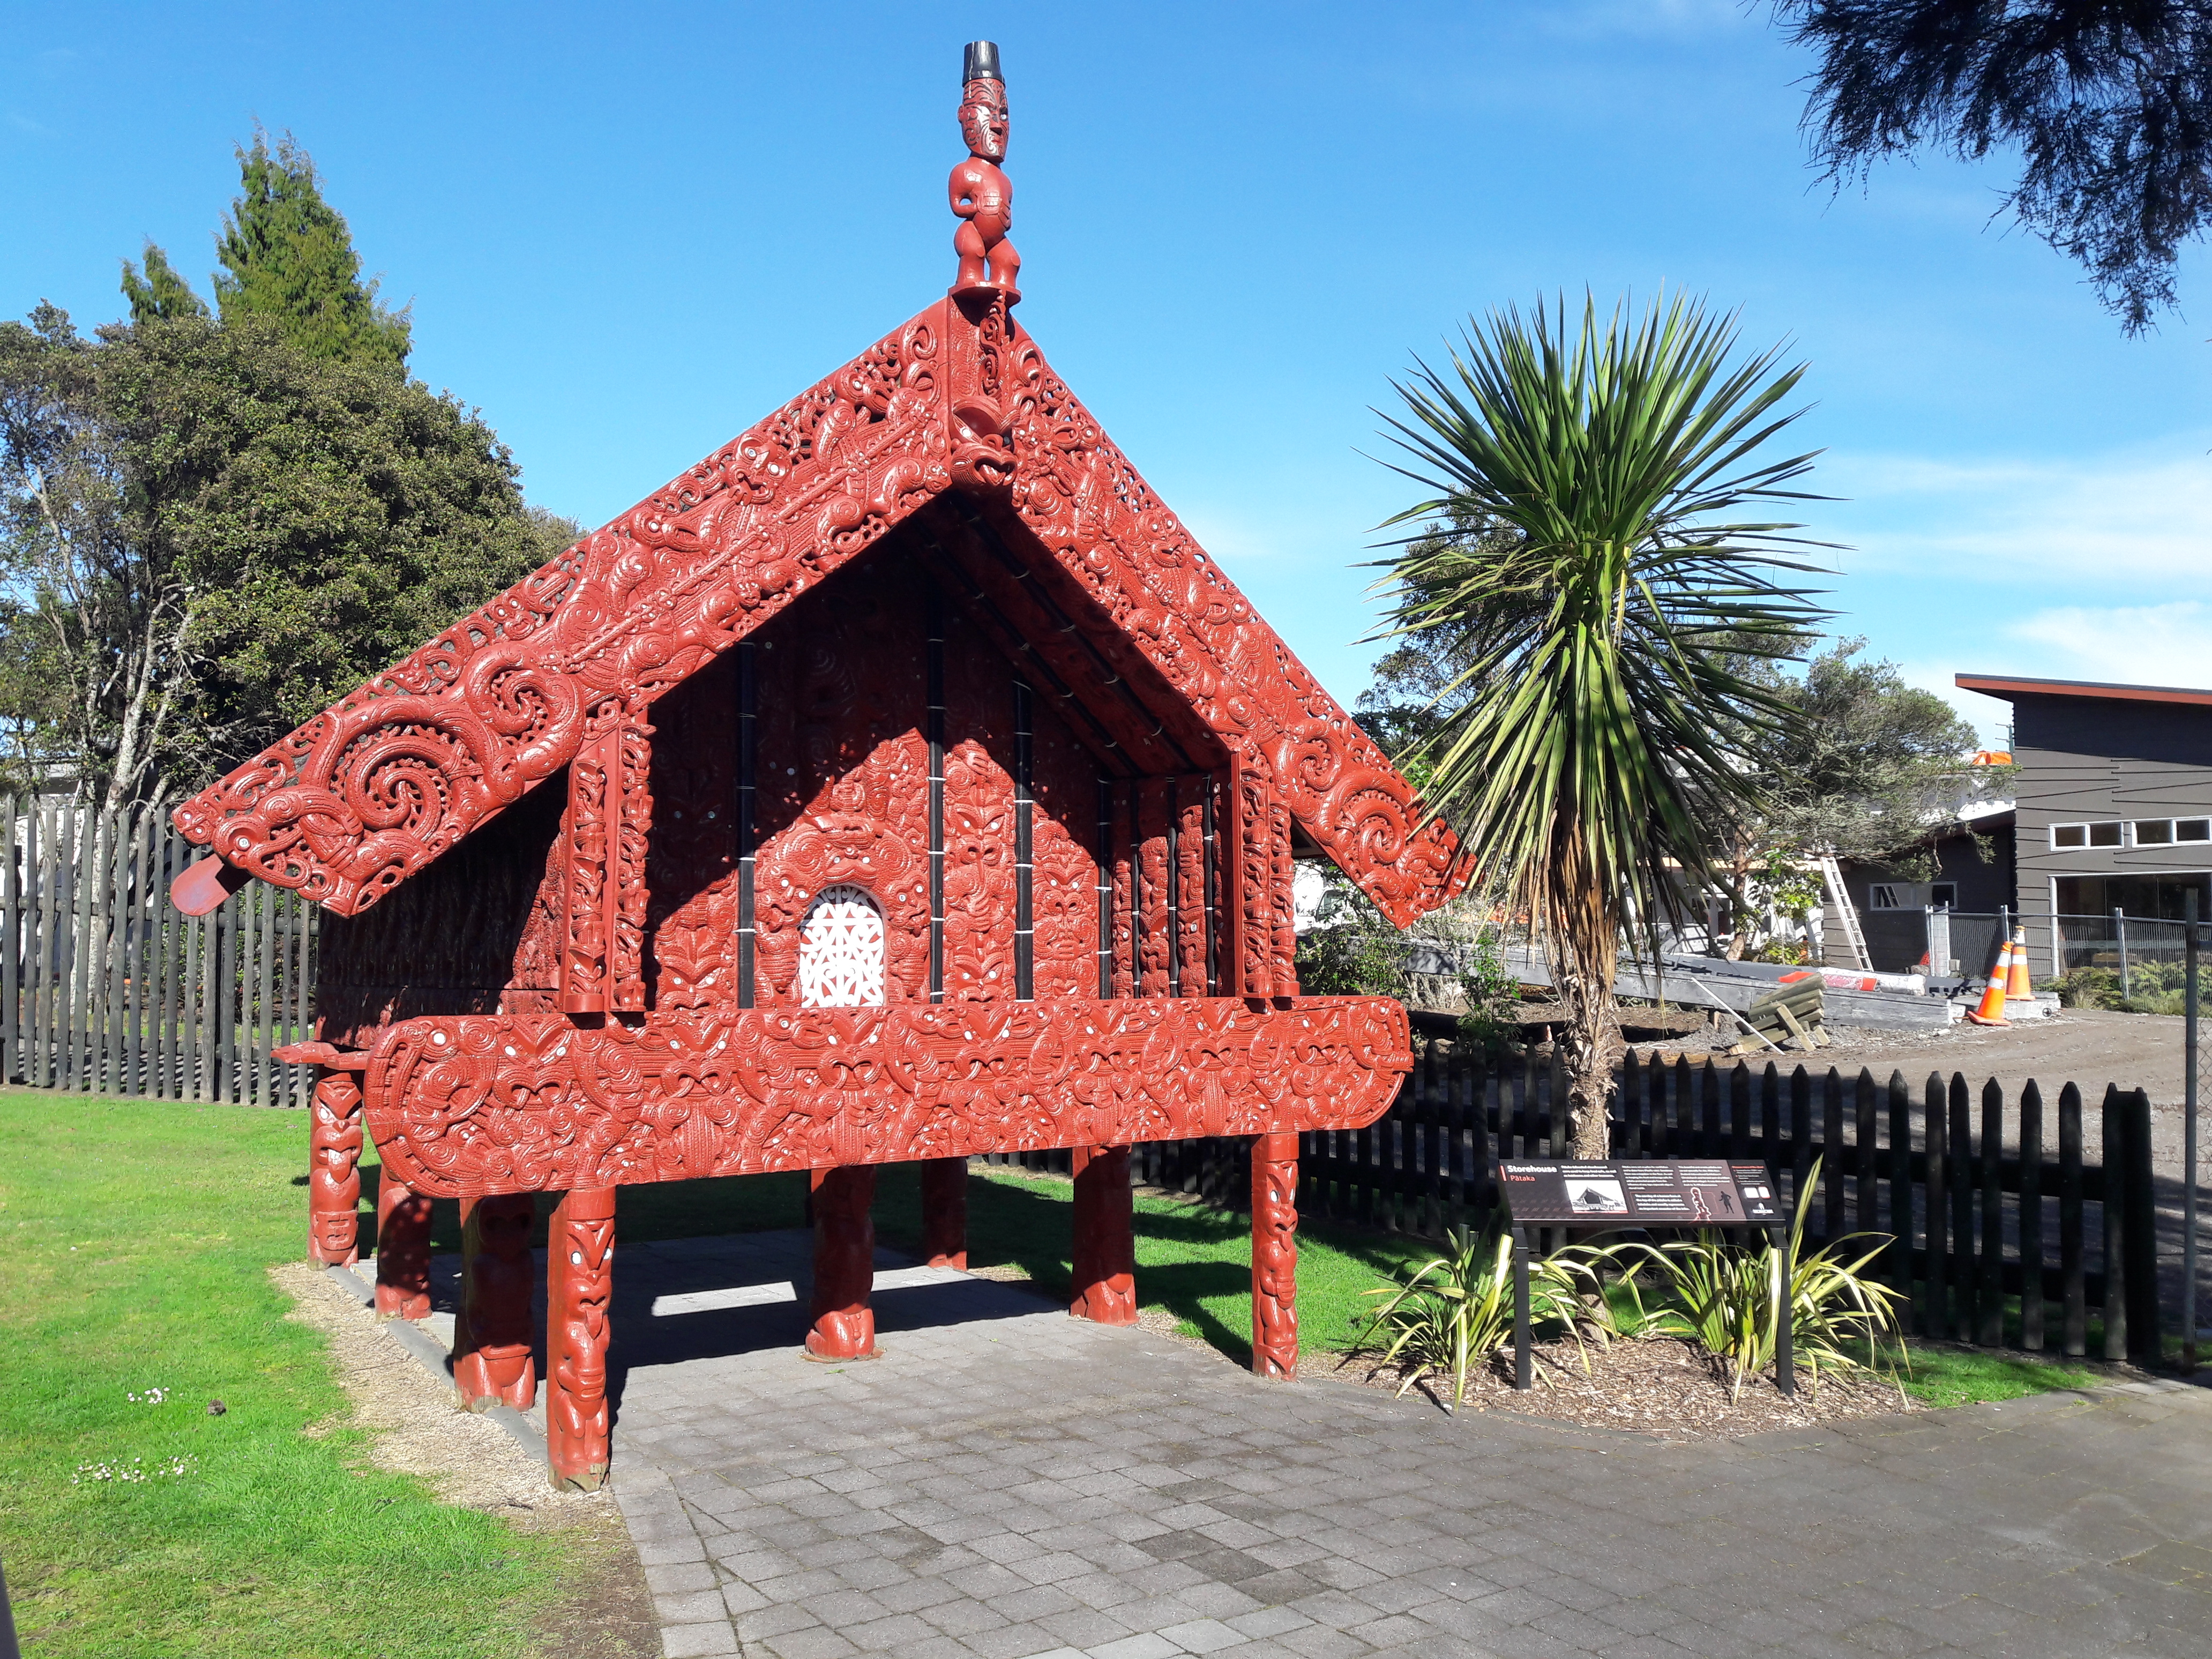 The intricate and beautiful carvings on "Pataka" - the Maori store house